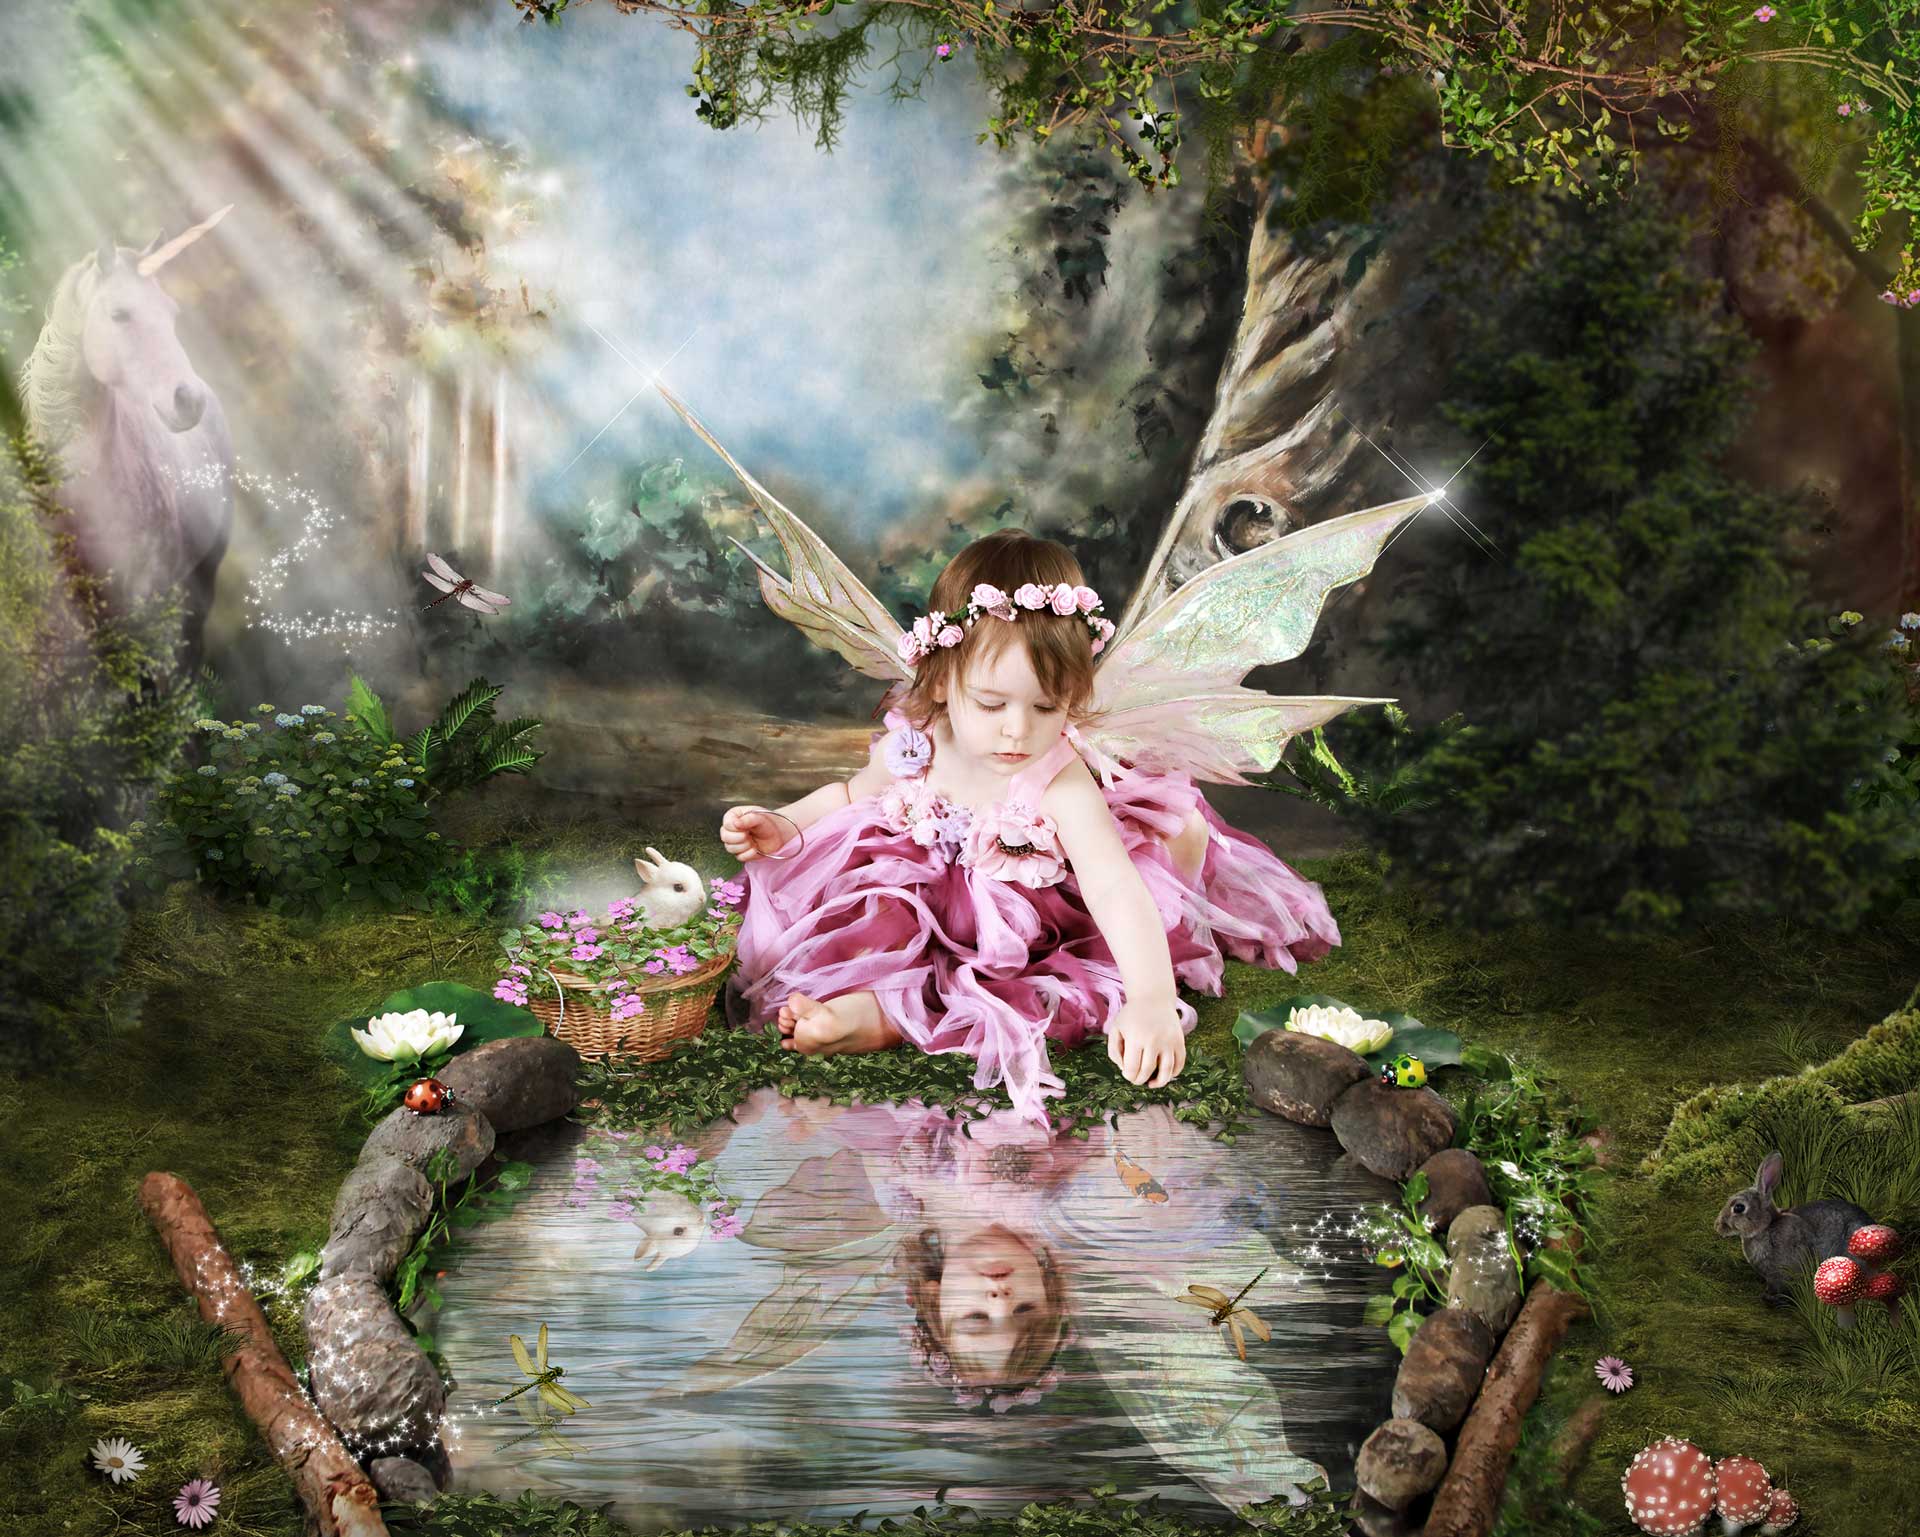 Little girl fairy by a pond in a magical forest